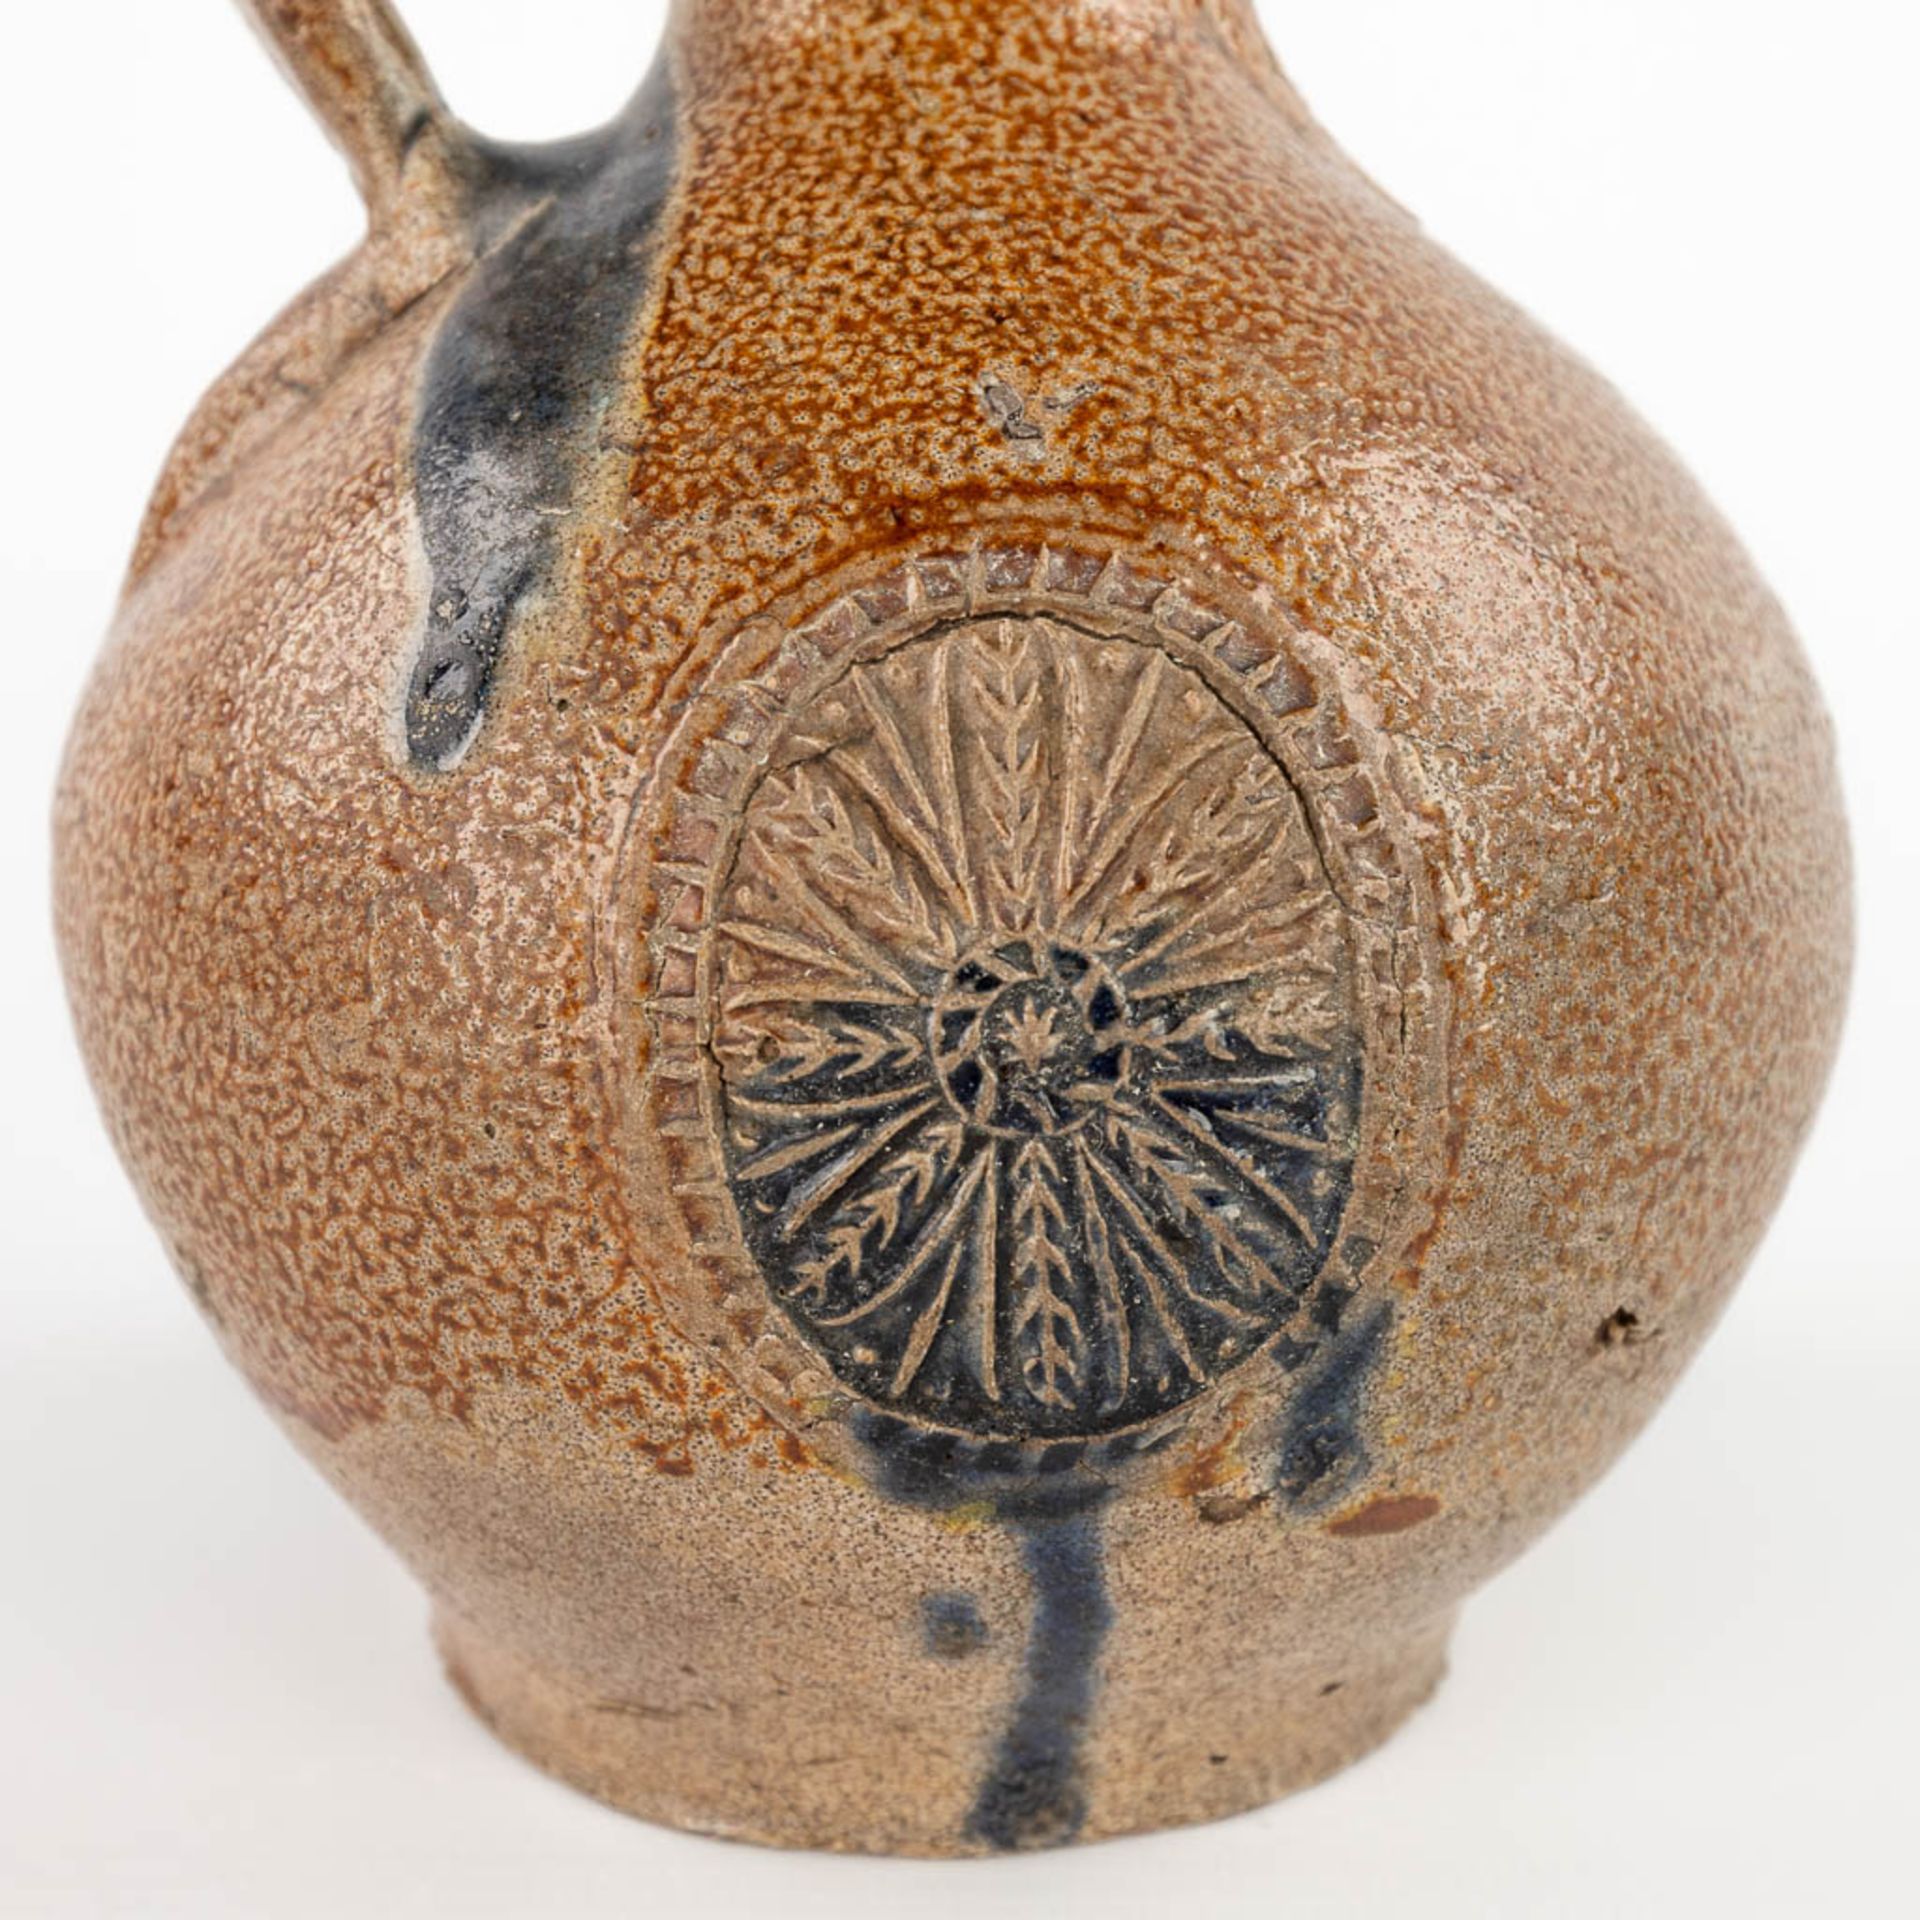 An antique Bartmann jug with 3 cartouches, 17th C. (H:20 x D:14,5 cm) - Image 12 of 14